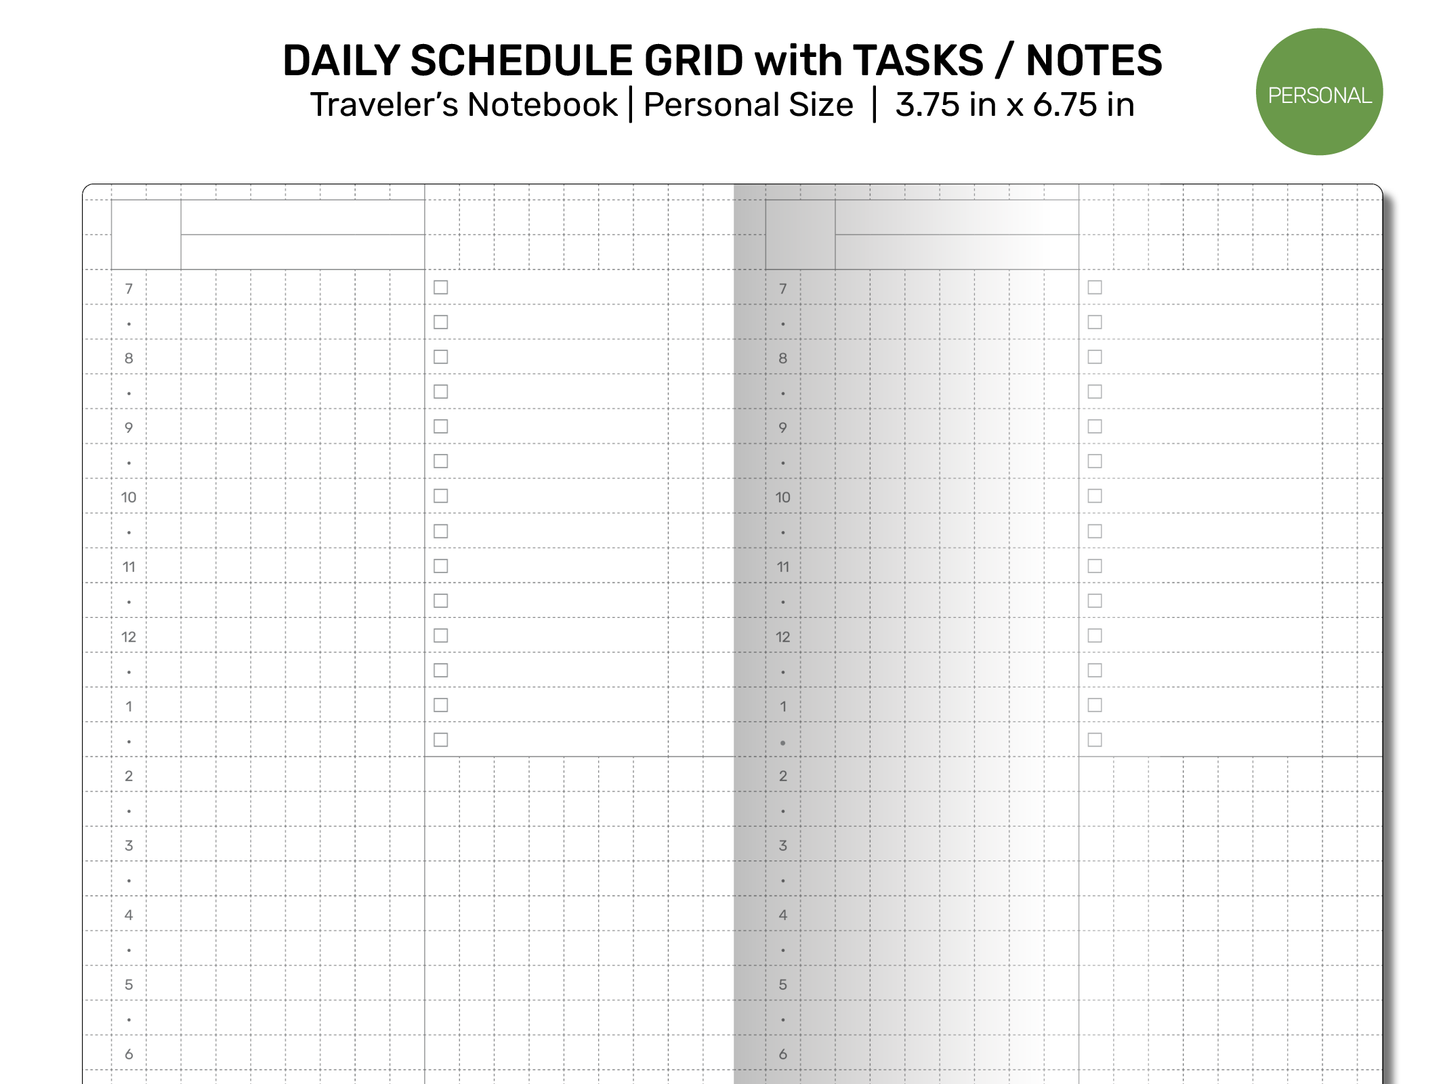 TN Personal Size DAILY Schedule Printable Traveler's Notebook Insert PER006